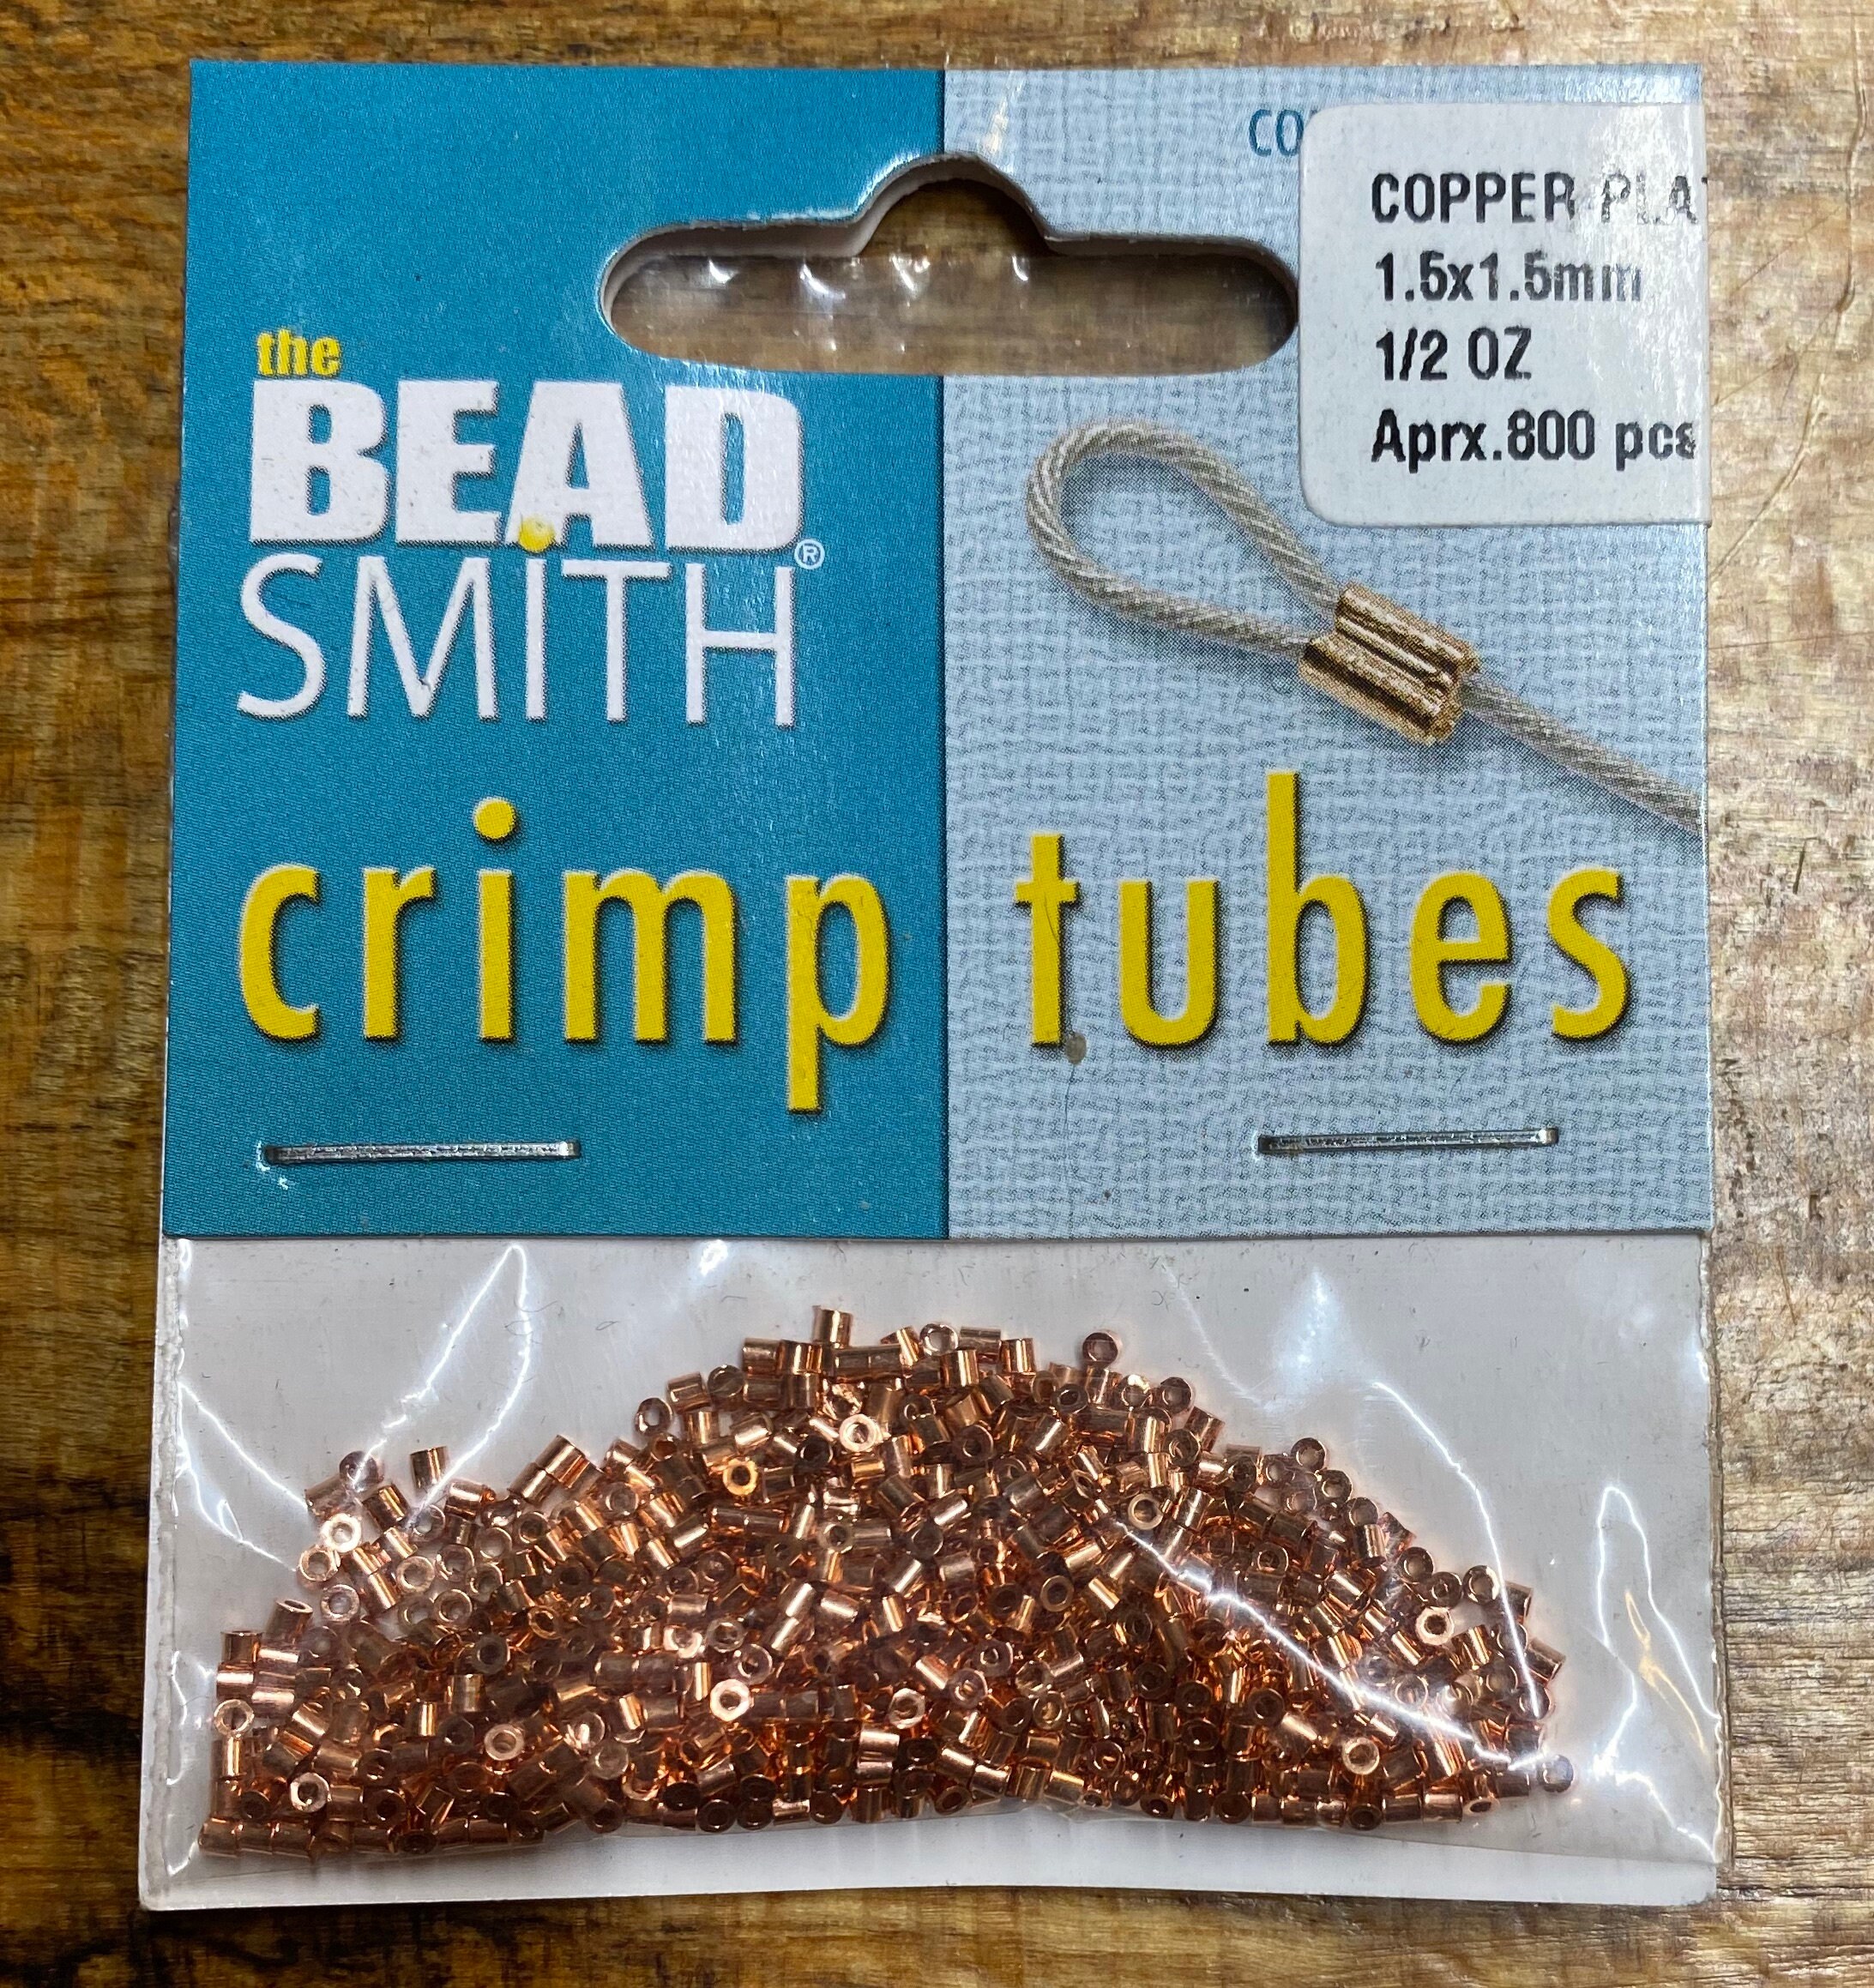 Beadsmith Gold Plated 4x2mm Crimp Tube Beads